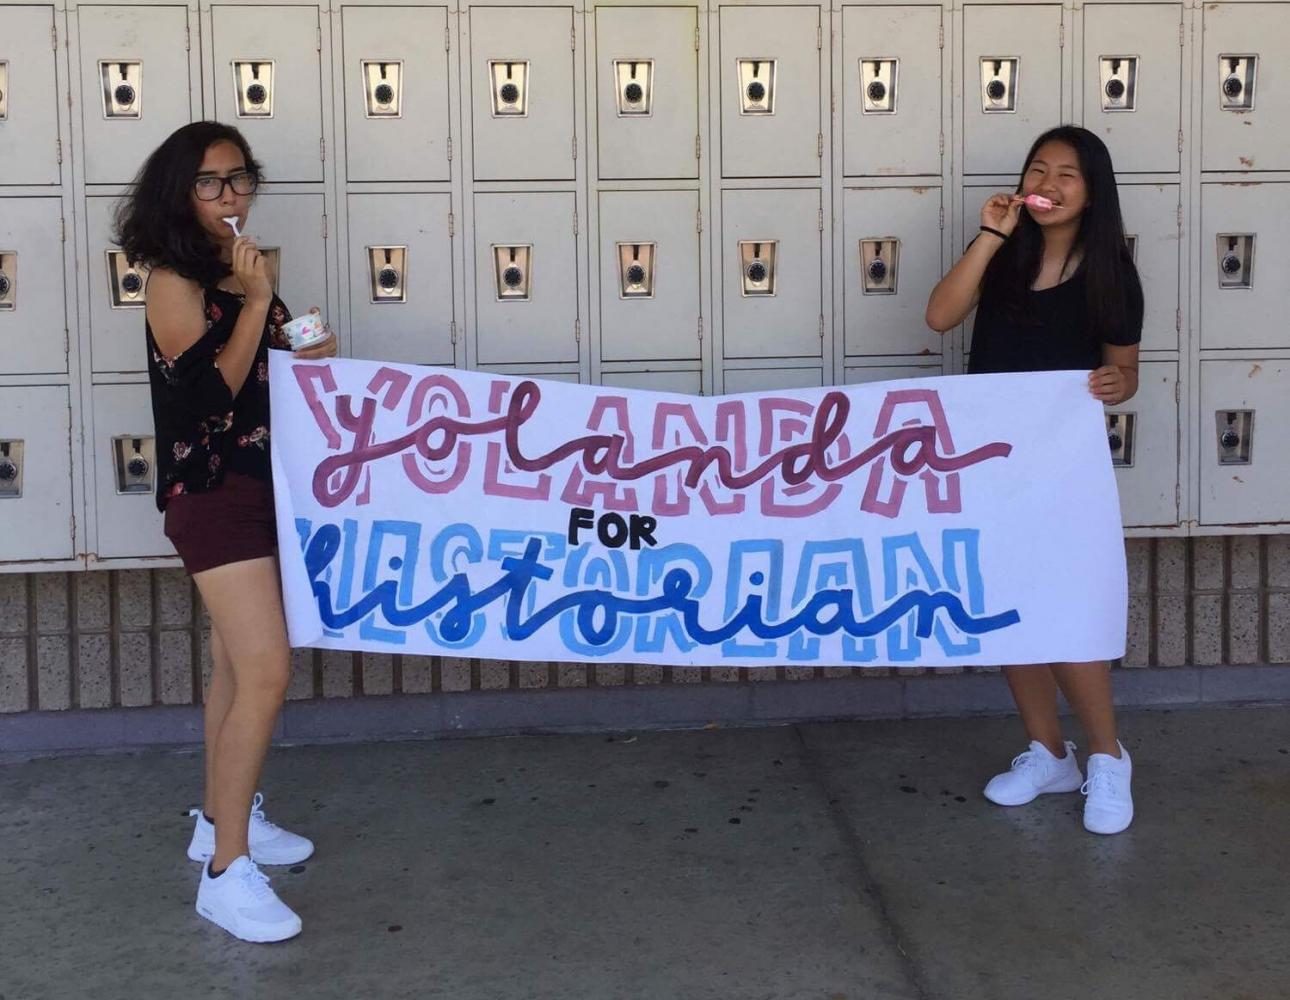 DBHS freshmen running for class officer positions took pictures with their posters as a part of their campaign. 